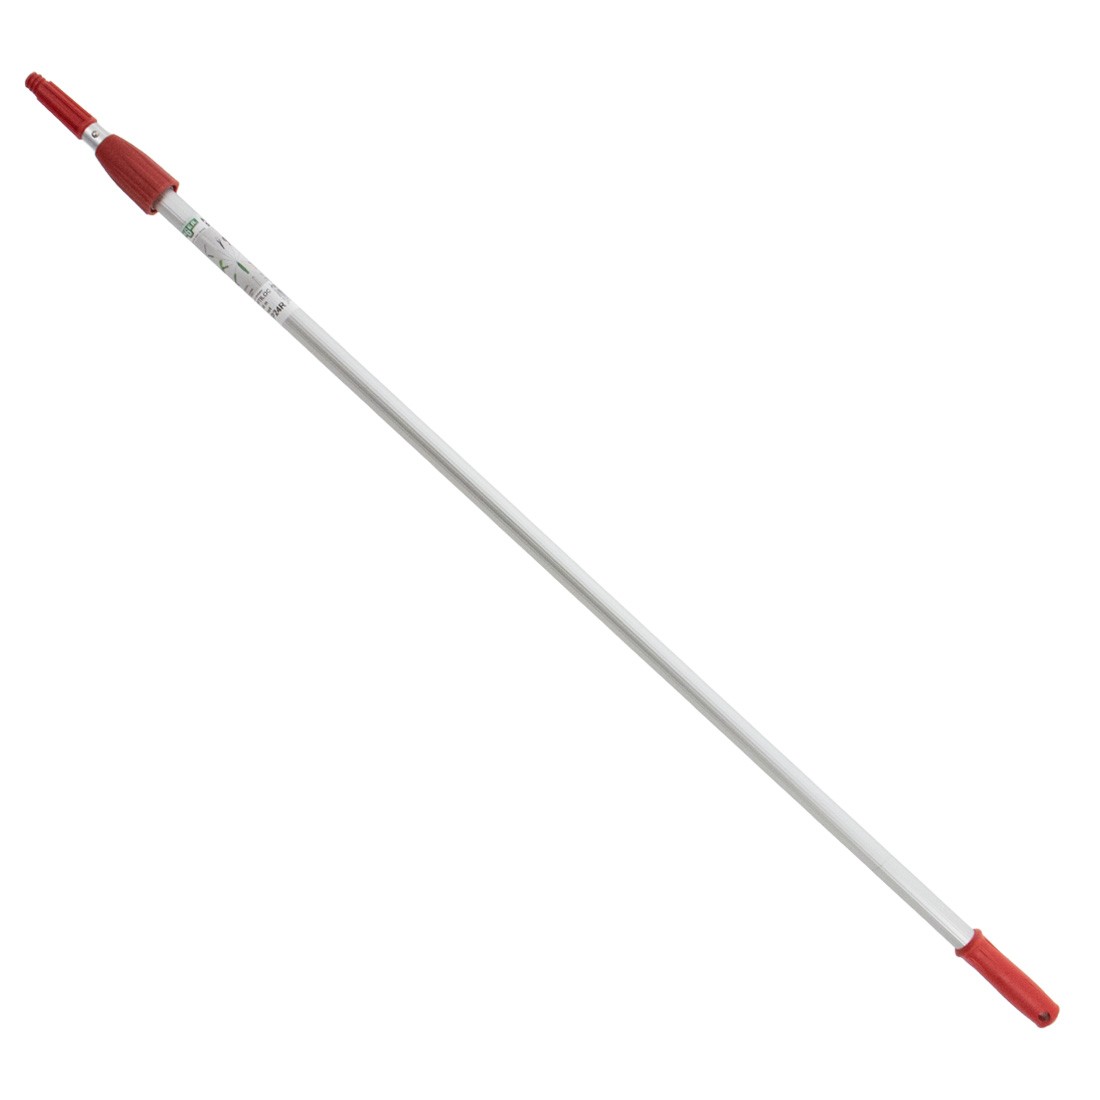 Unger OptiLoc Extension Pole 2 Section, 8 Foot Red